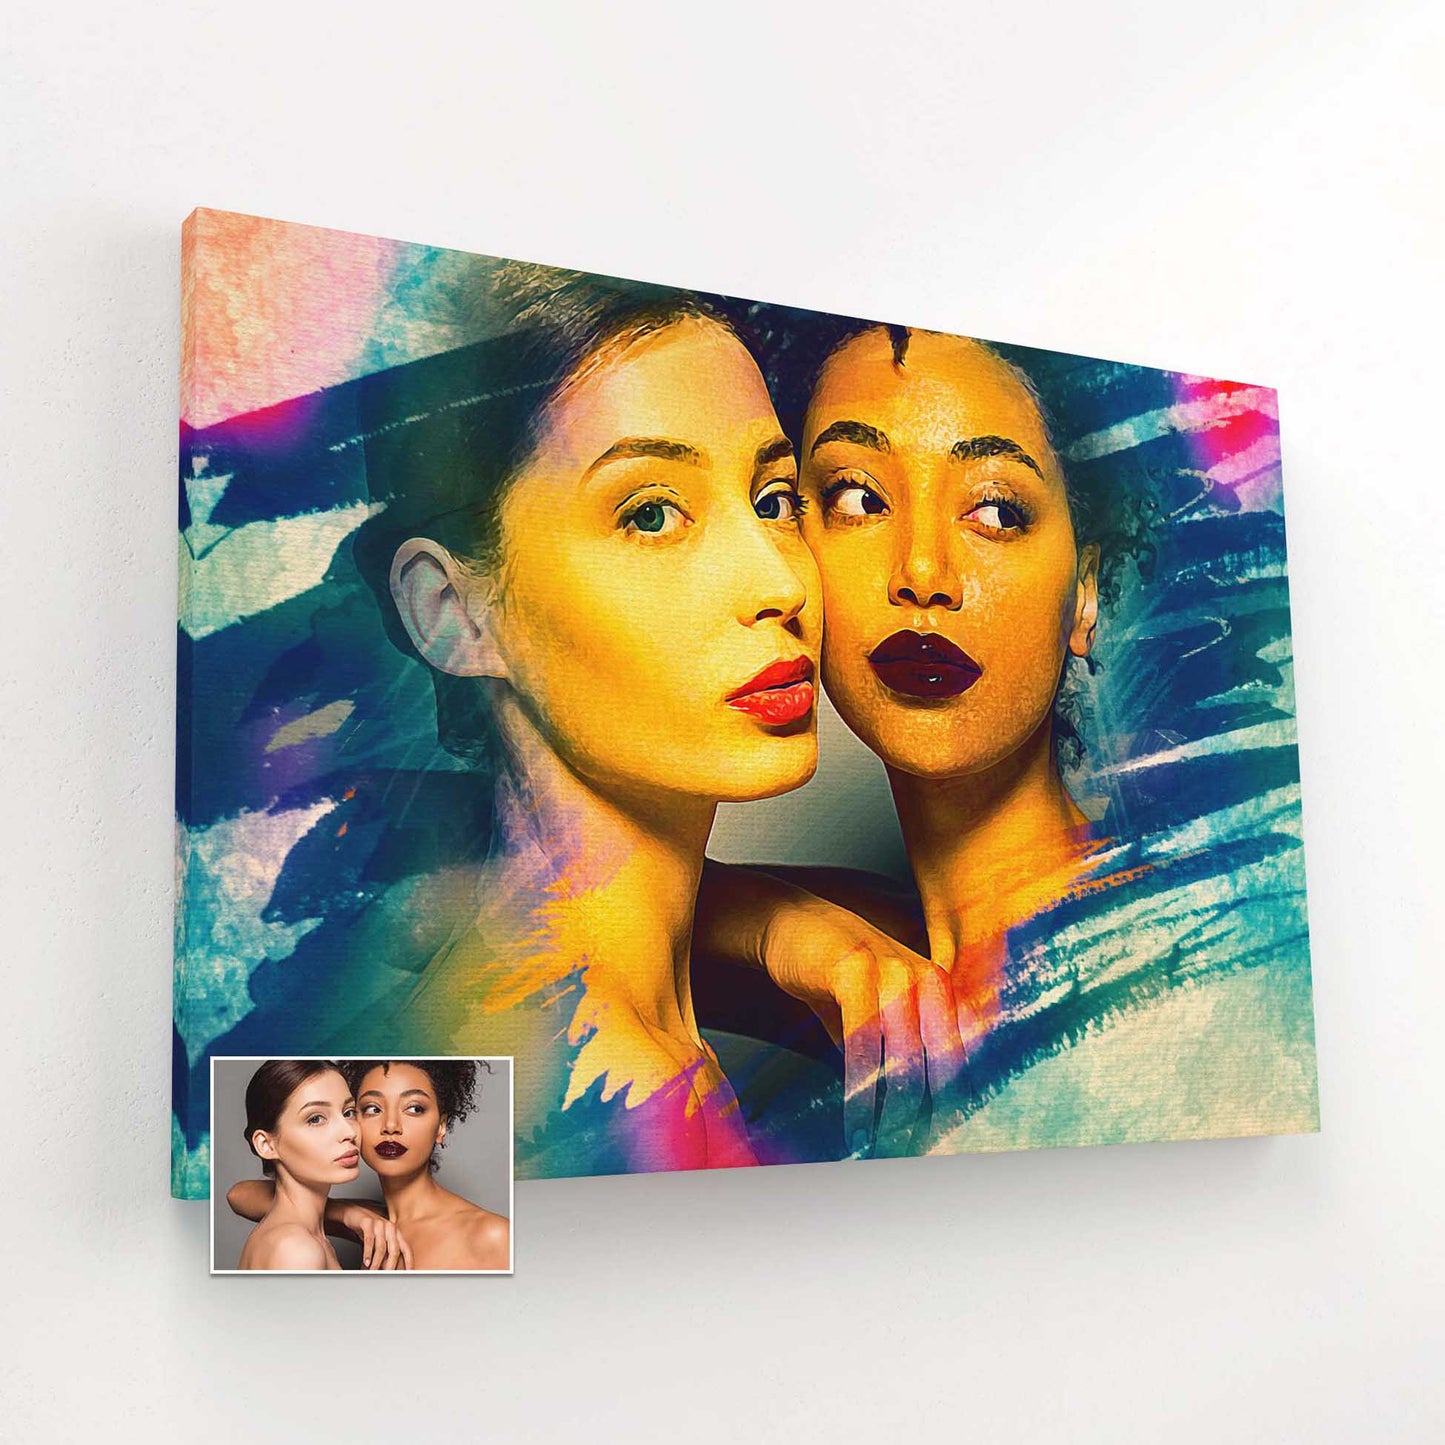 Express your creativity with our Personalised Artistic Painting Canvas